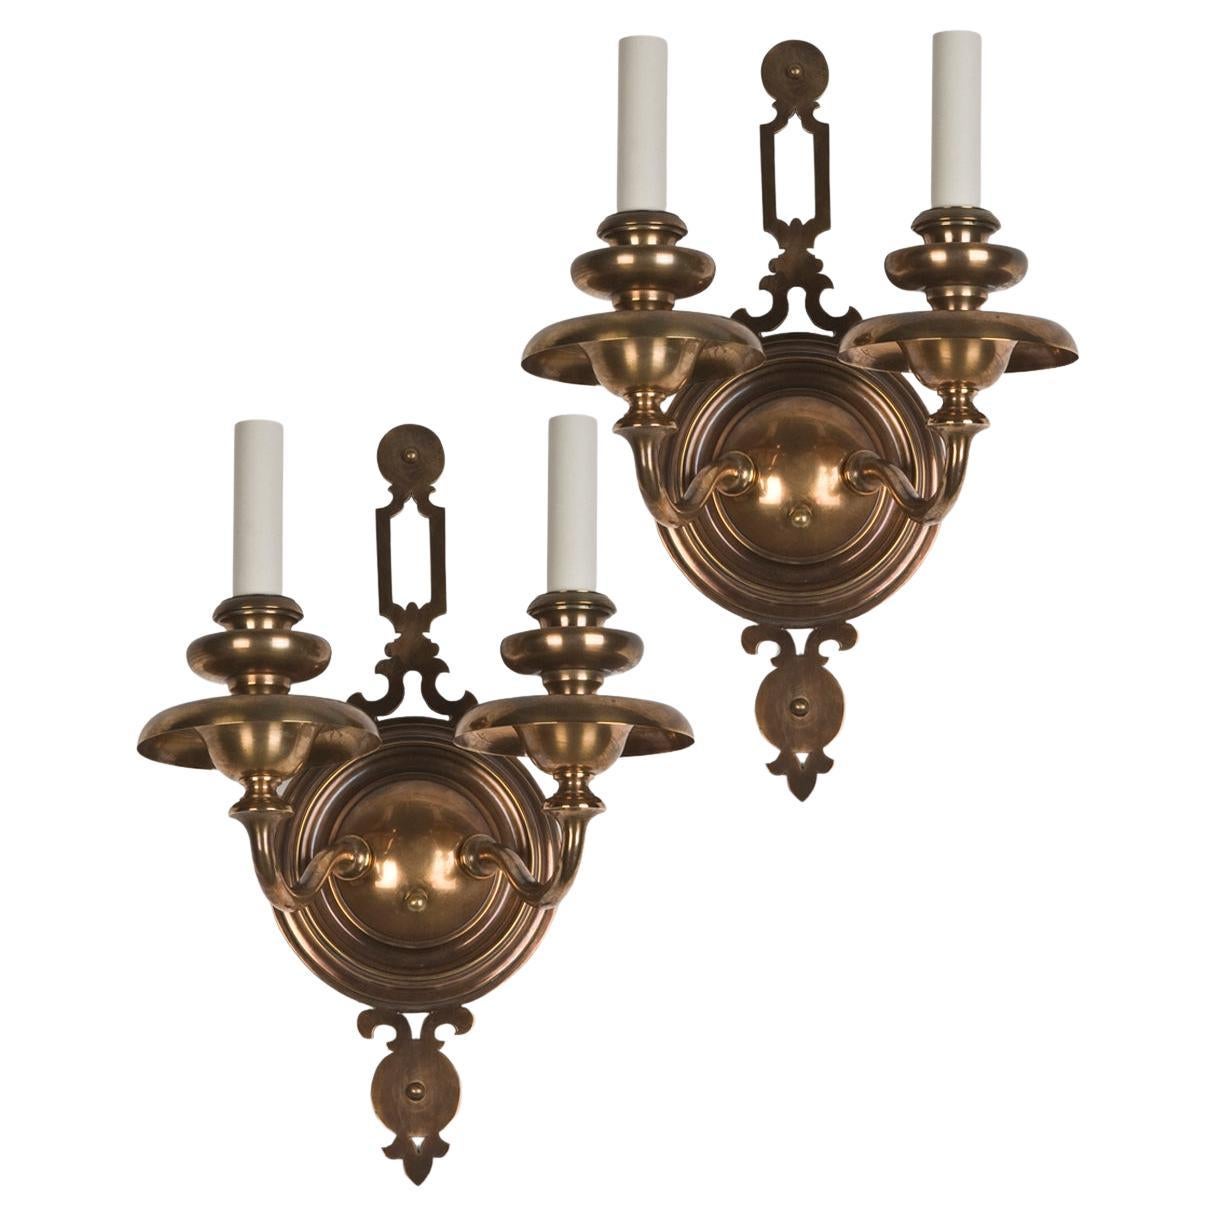 Two Arm Aged Bronze Sconces with Pierced Finials by Bradley and Hubbard c. 1920s For Sale